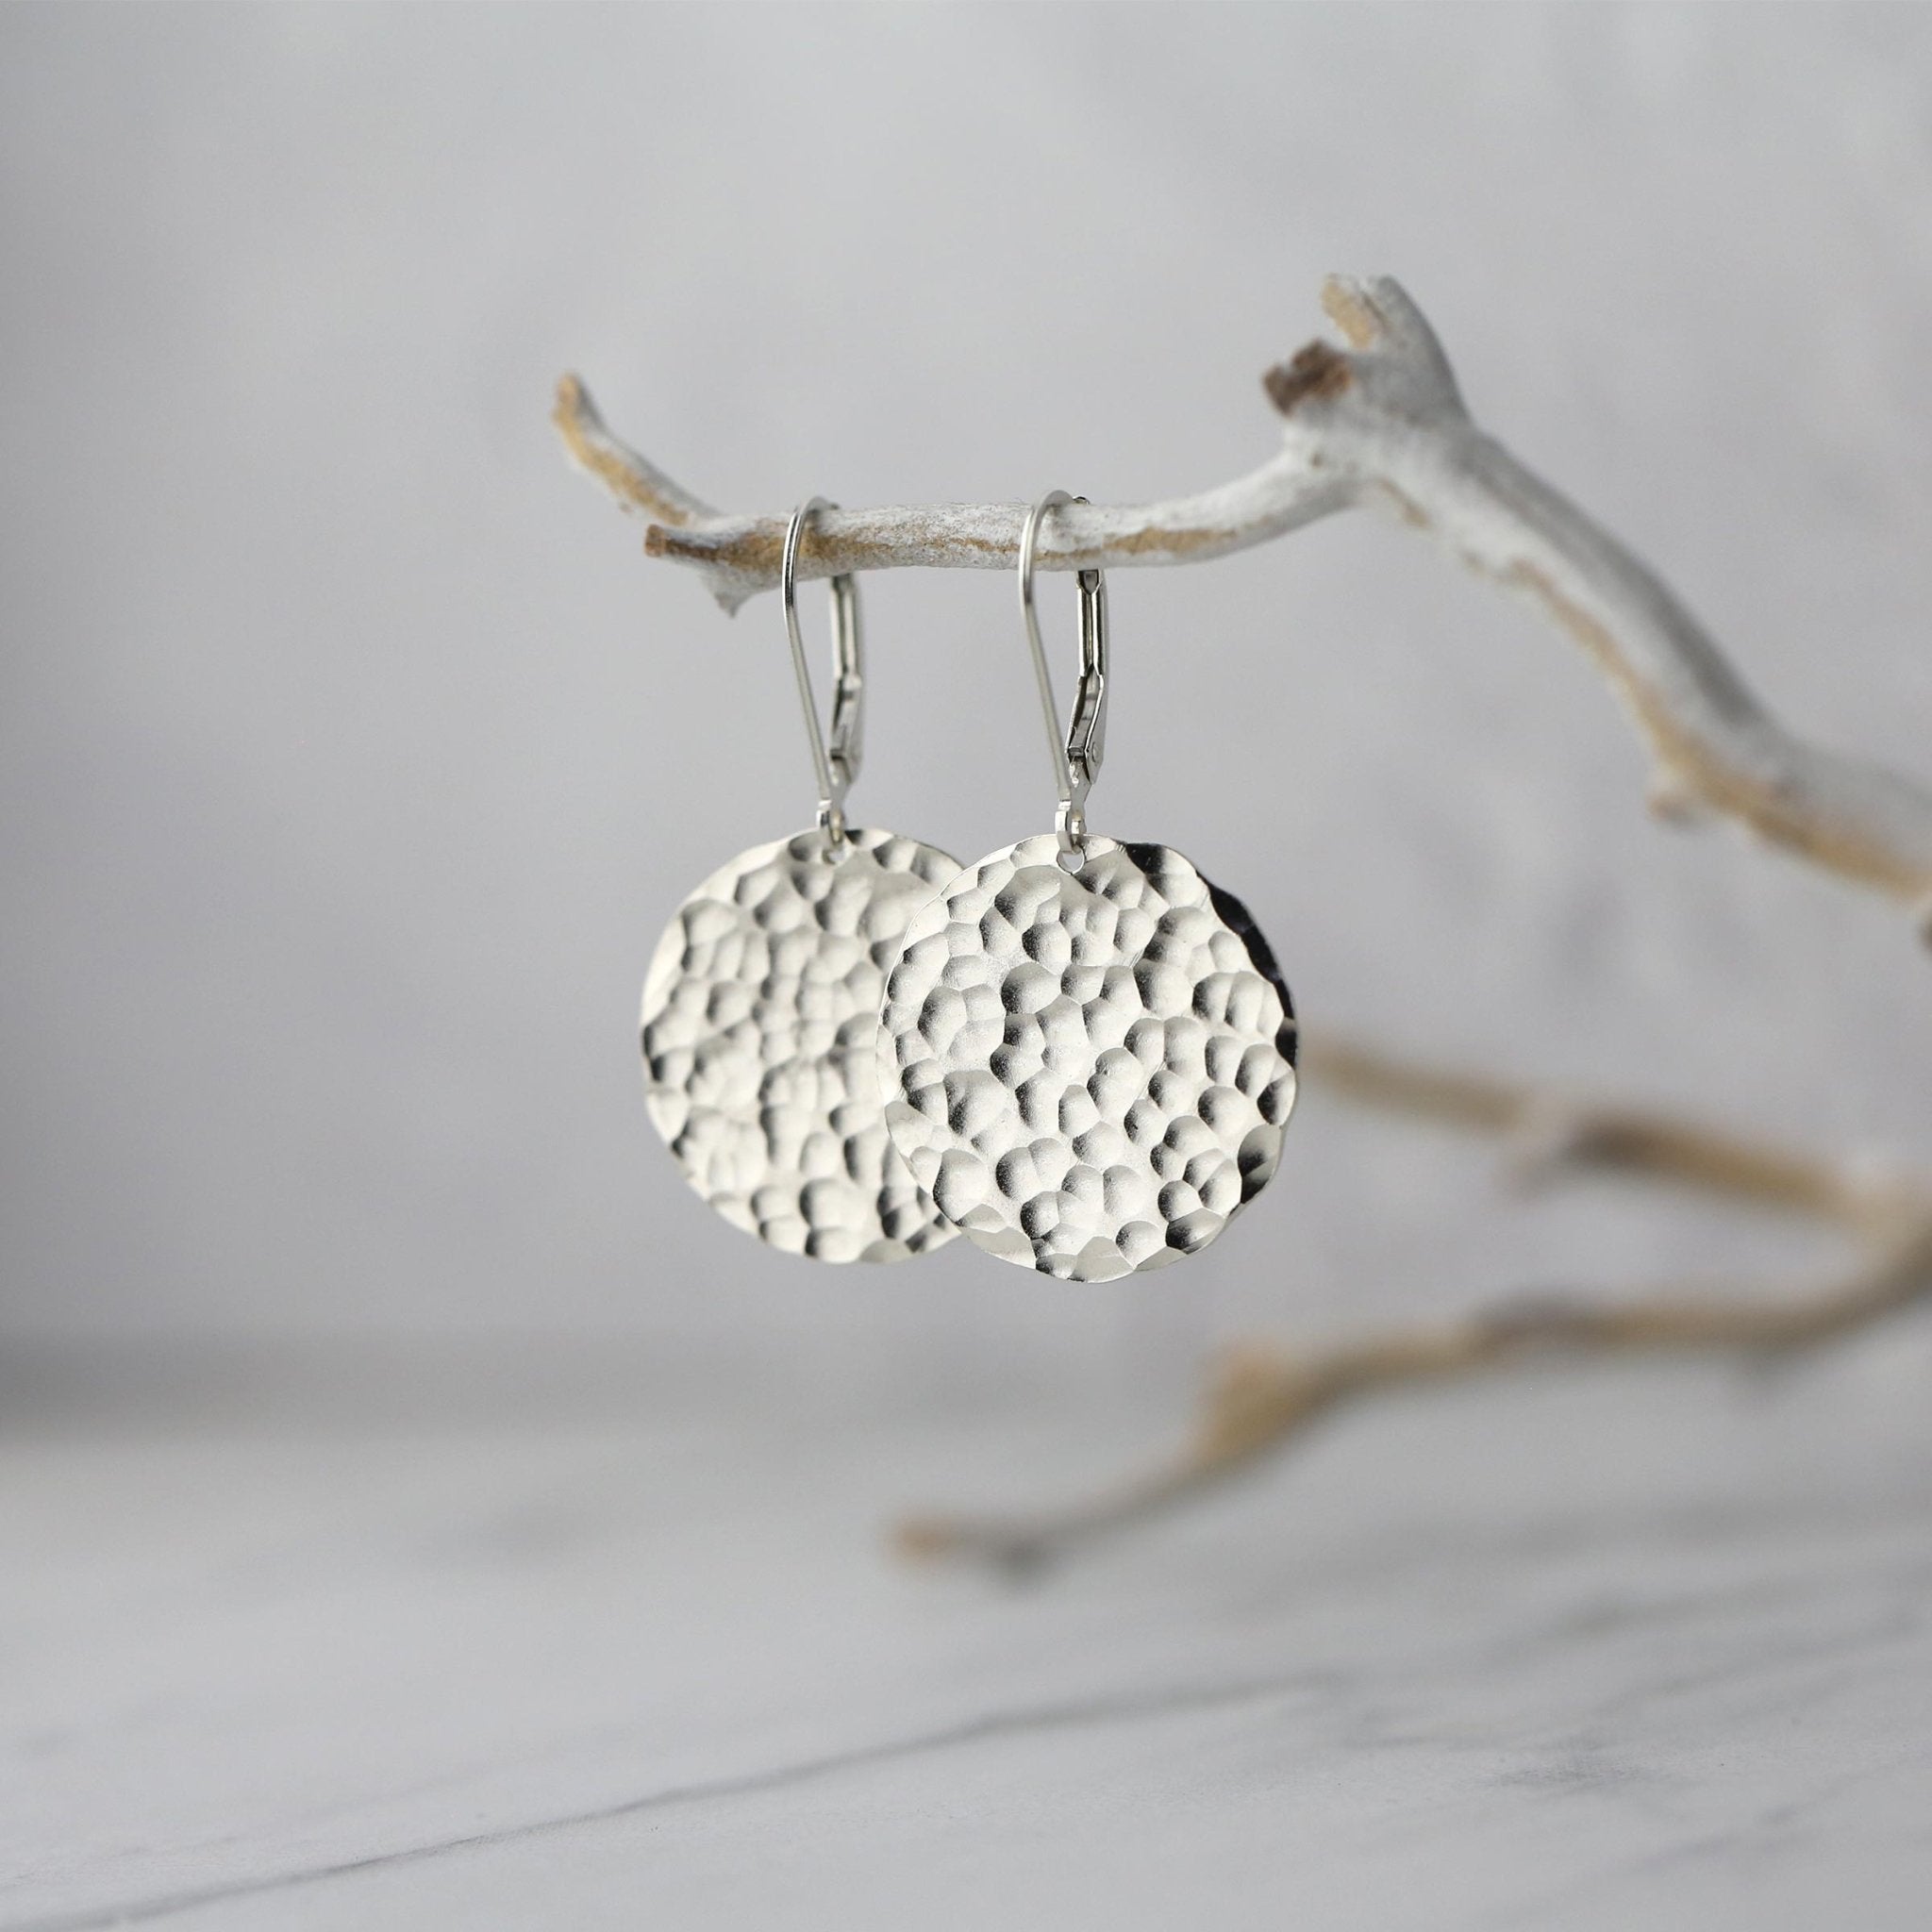 Large Hammered Silver Disc Earrings handmade by Burnish